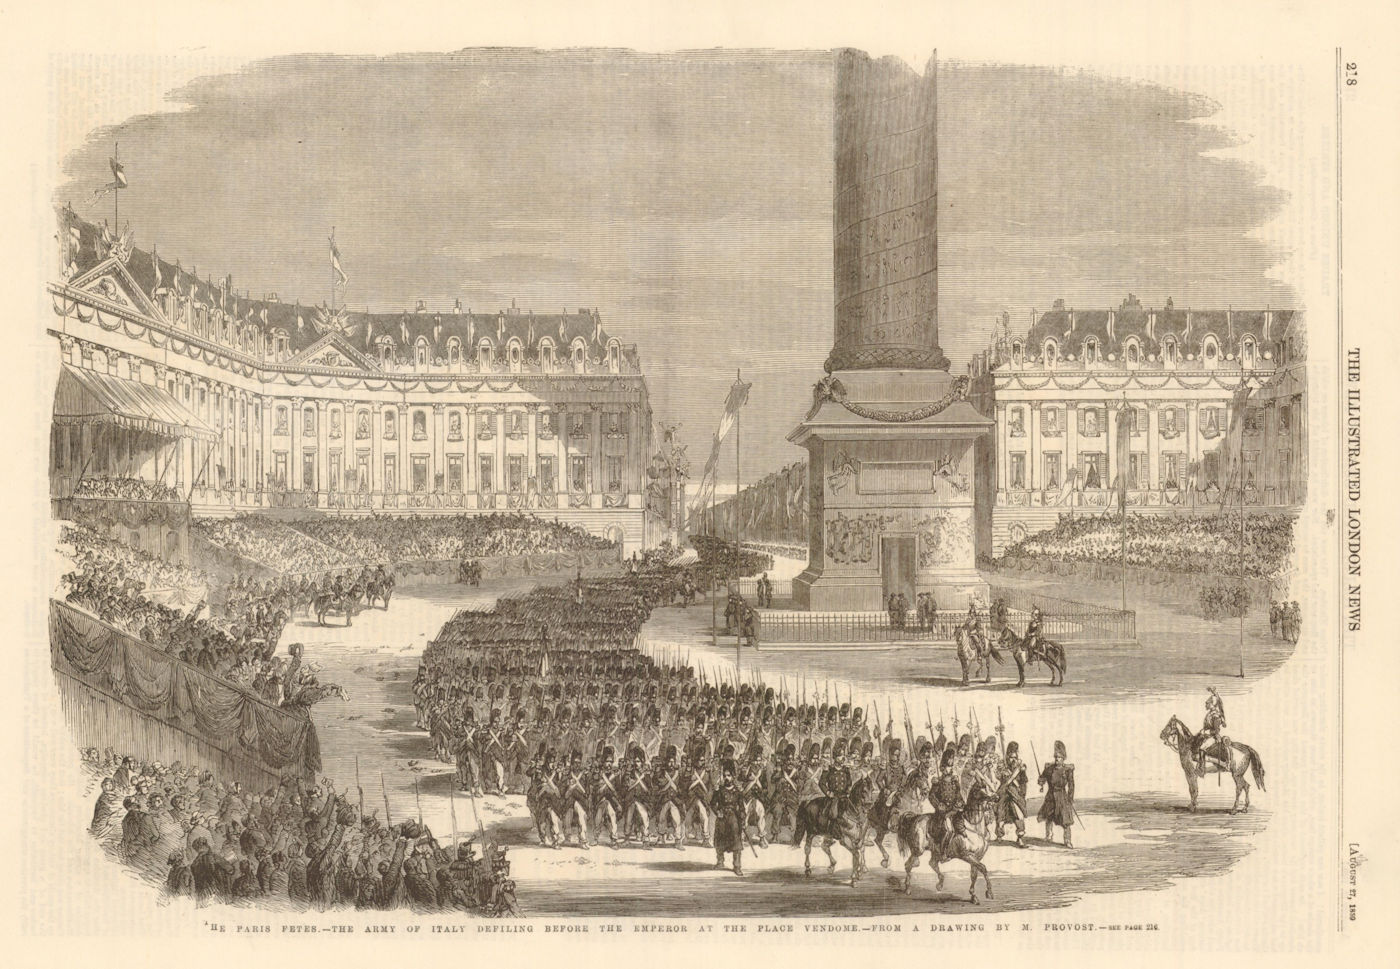 Associate Product Paris Fetes. Army of Italy defiling before the Emperor, Place Vendome 1859